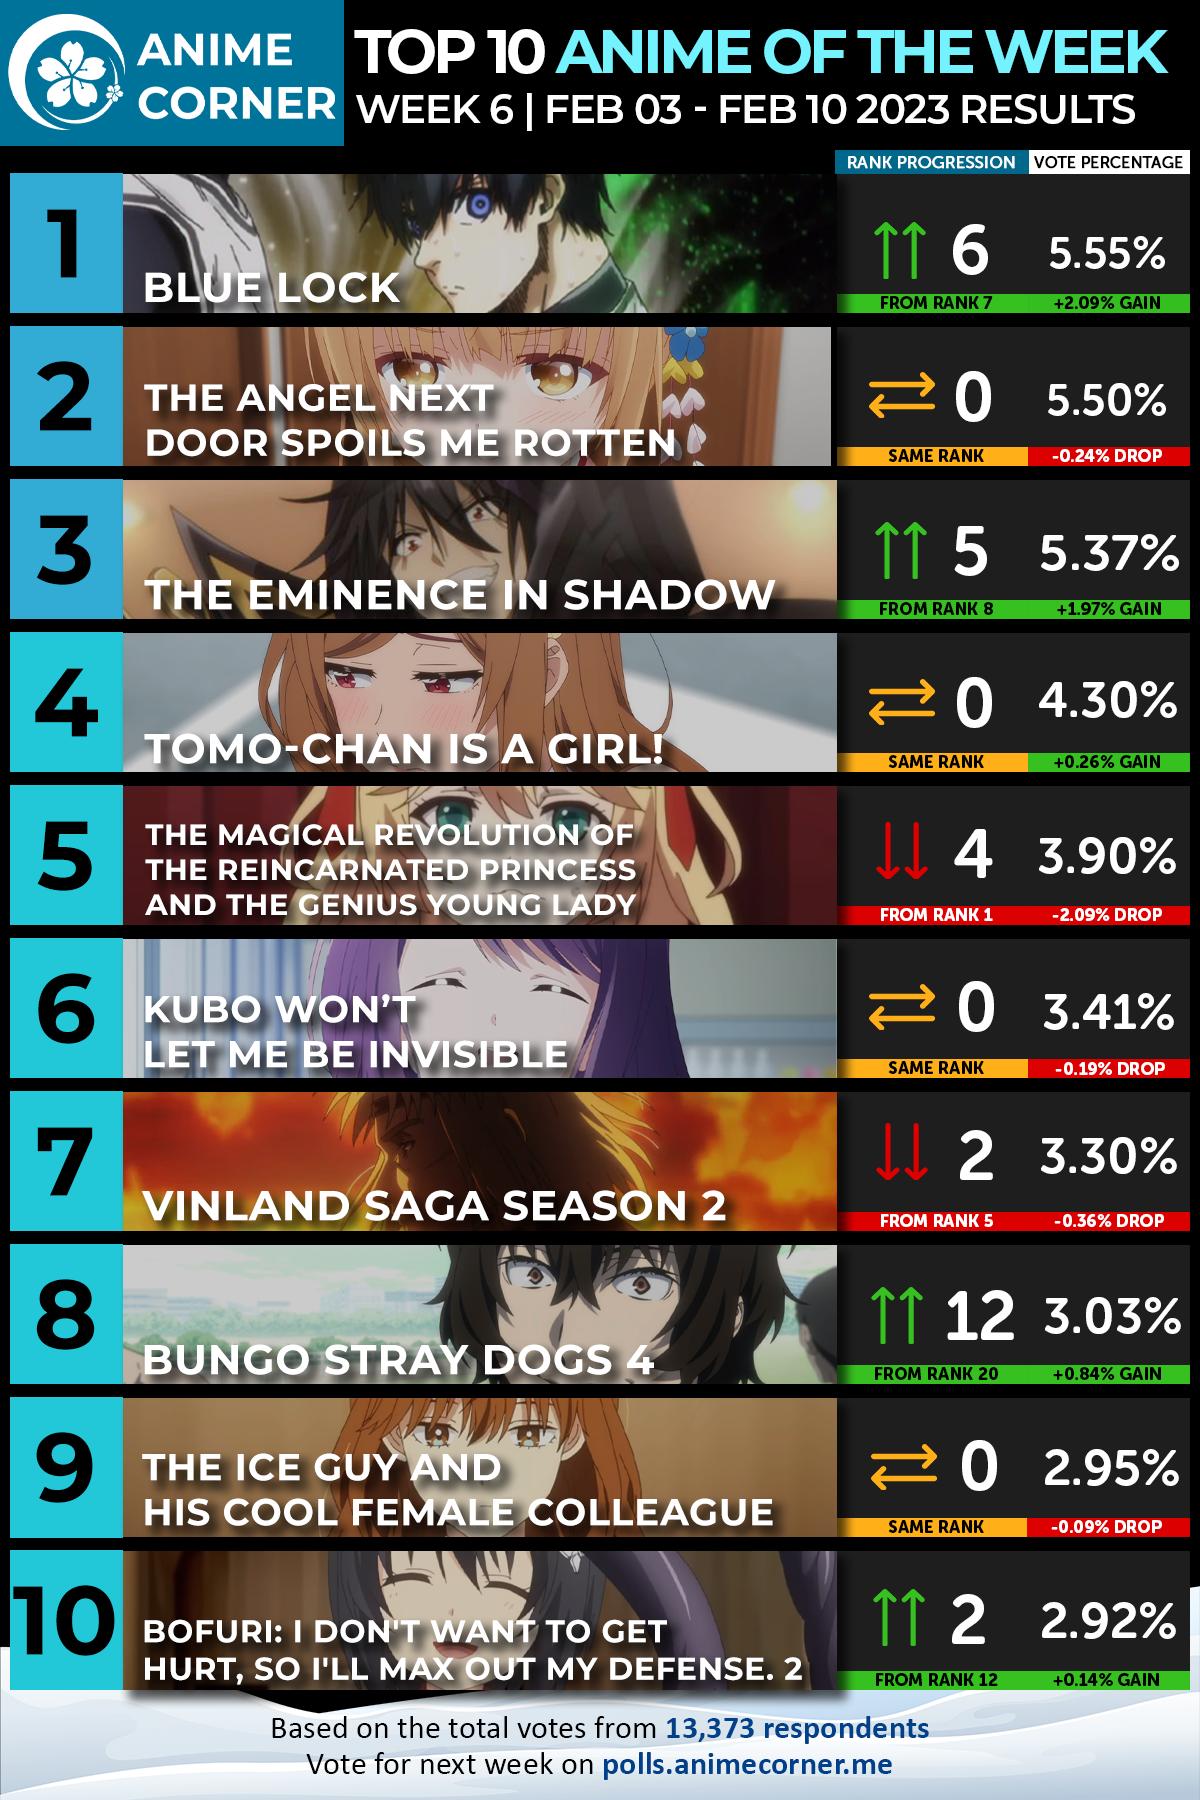 Top 10 Anime of the Week 2 for Spring 2021 Anime Season